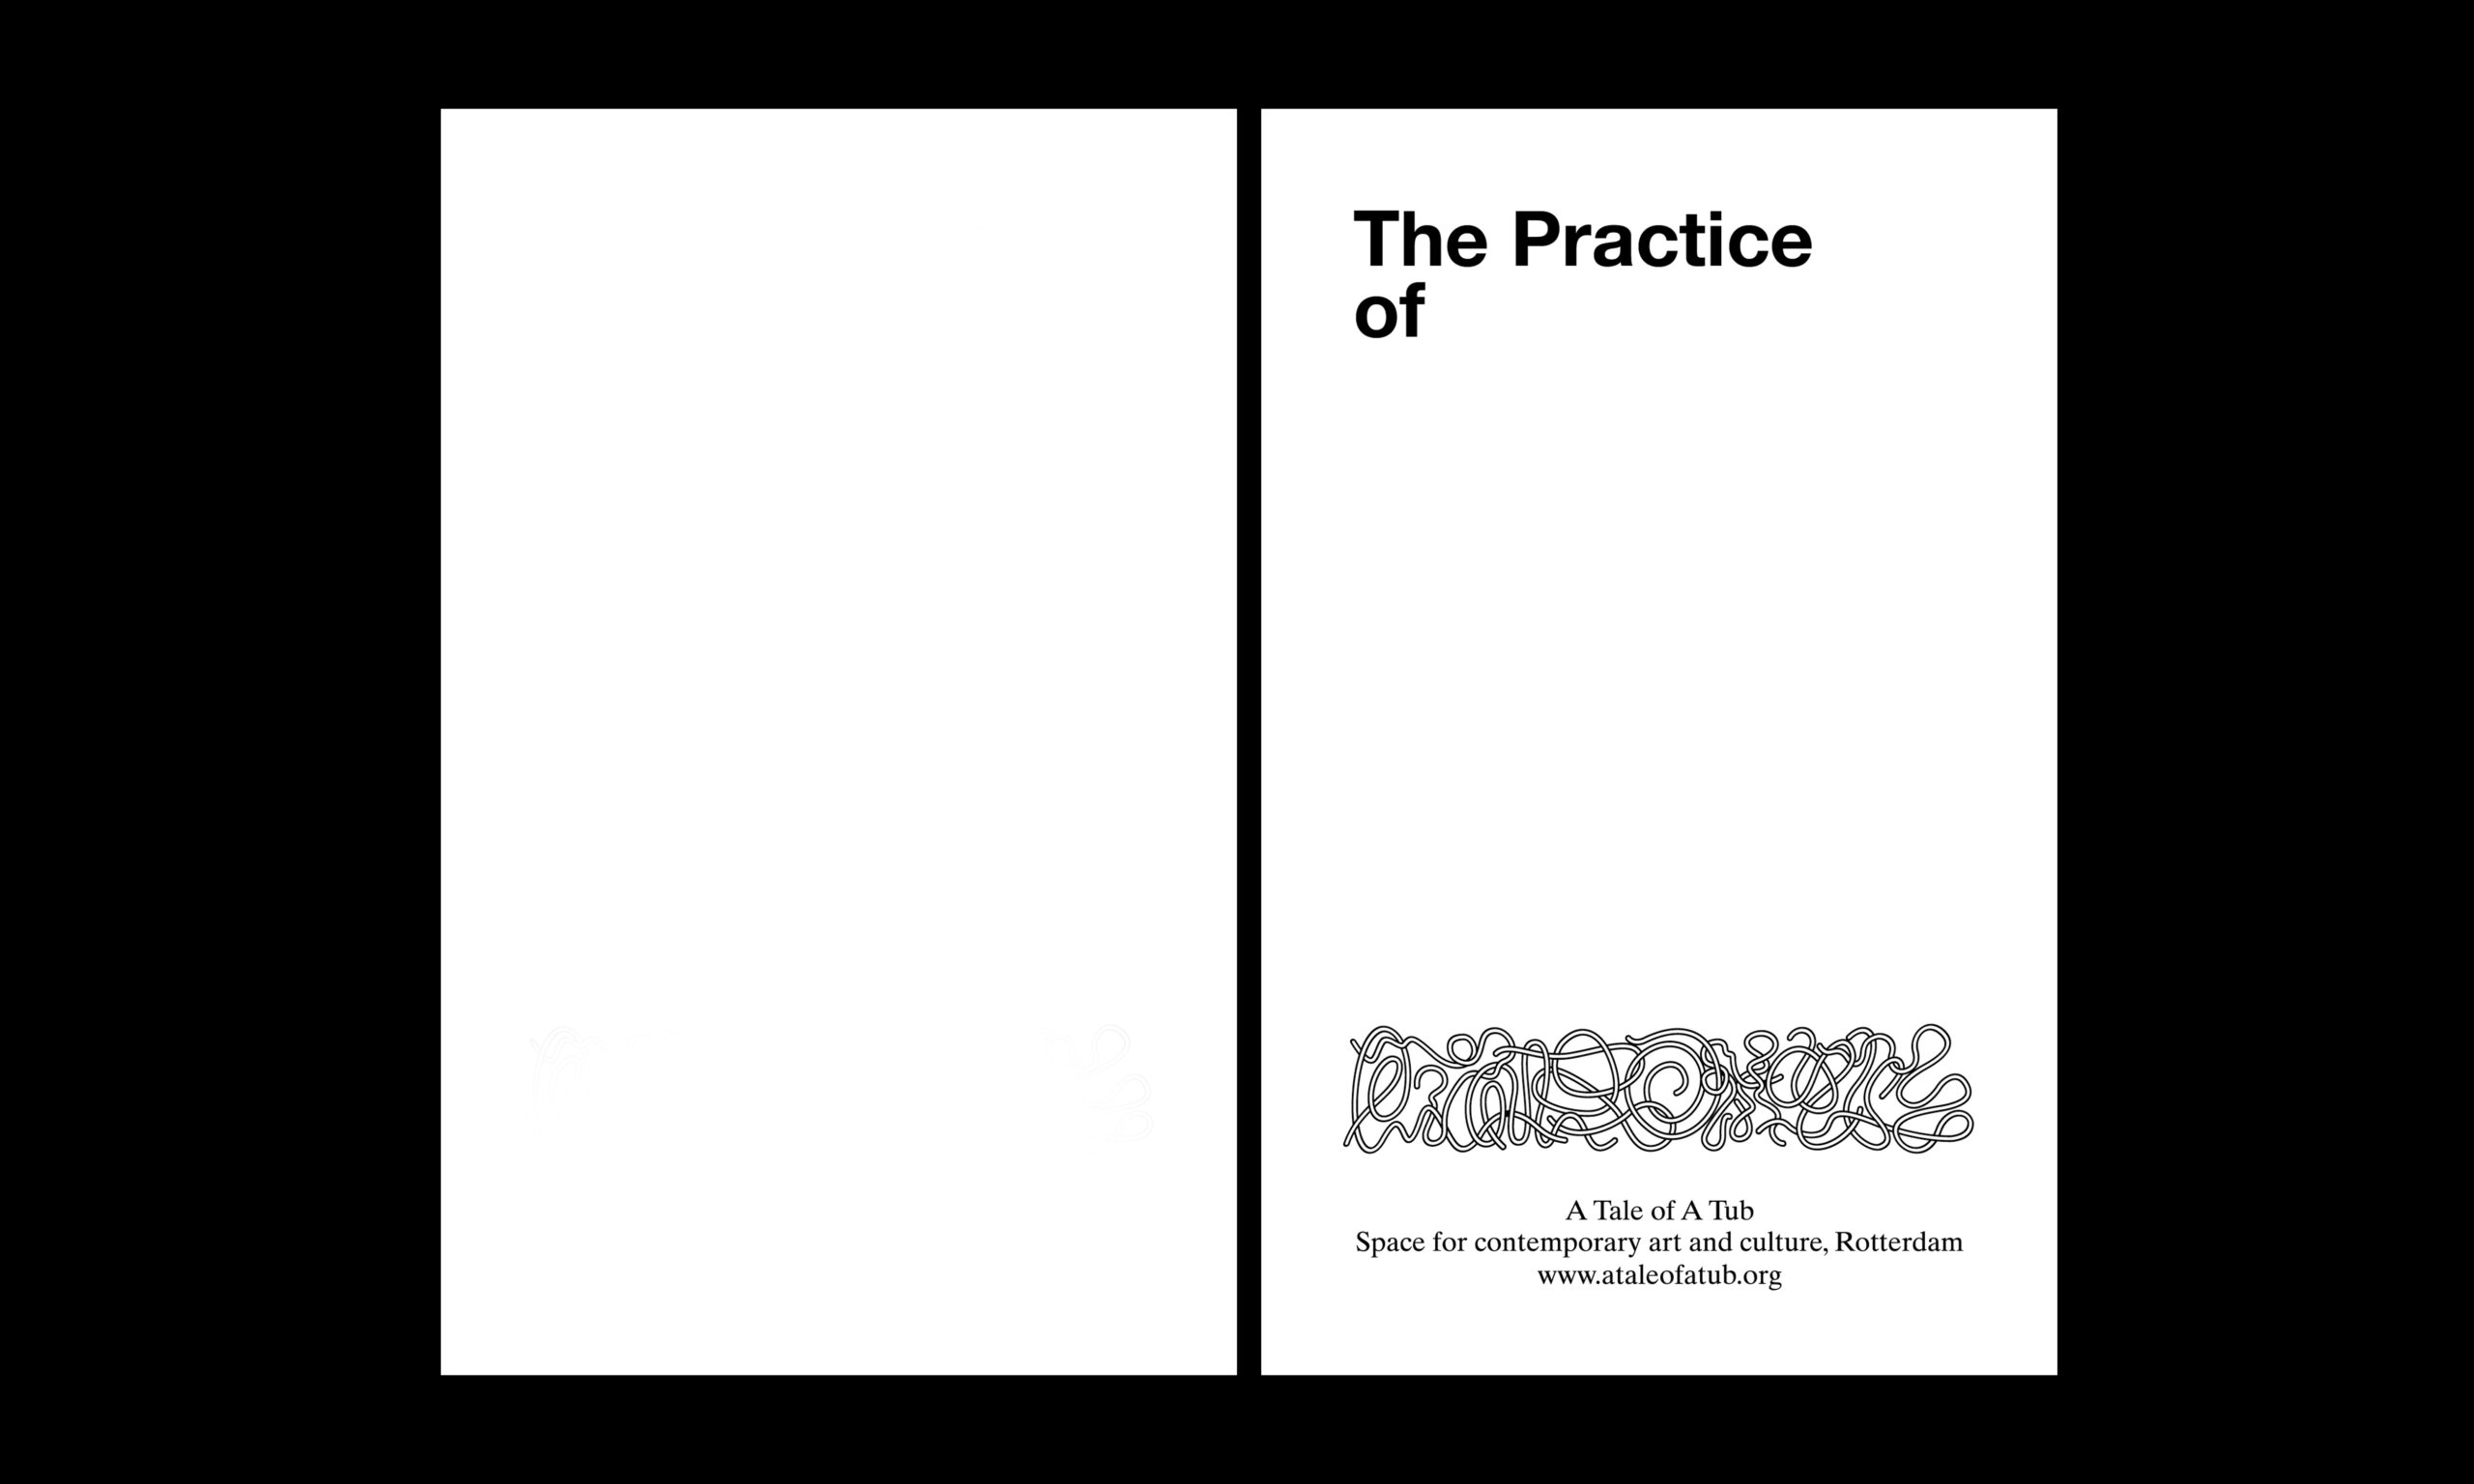 The Practice of